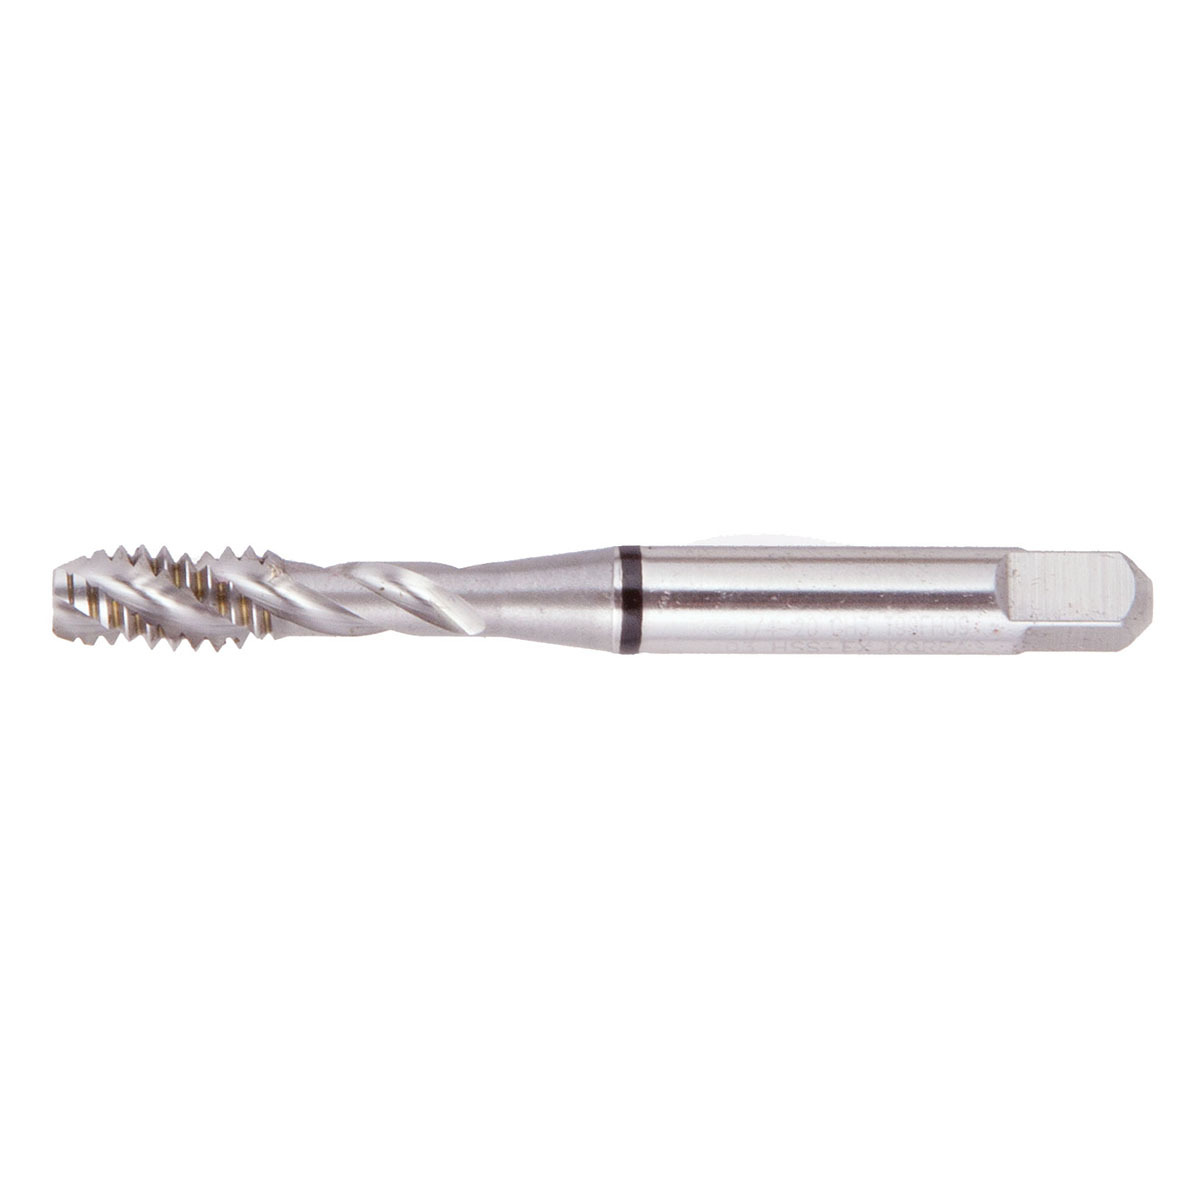 Drillco Series 2900E 1 1/4-11 1/2 High Speed Steel Pipe Tap 